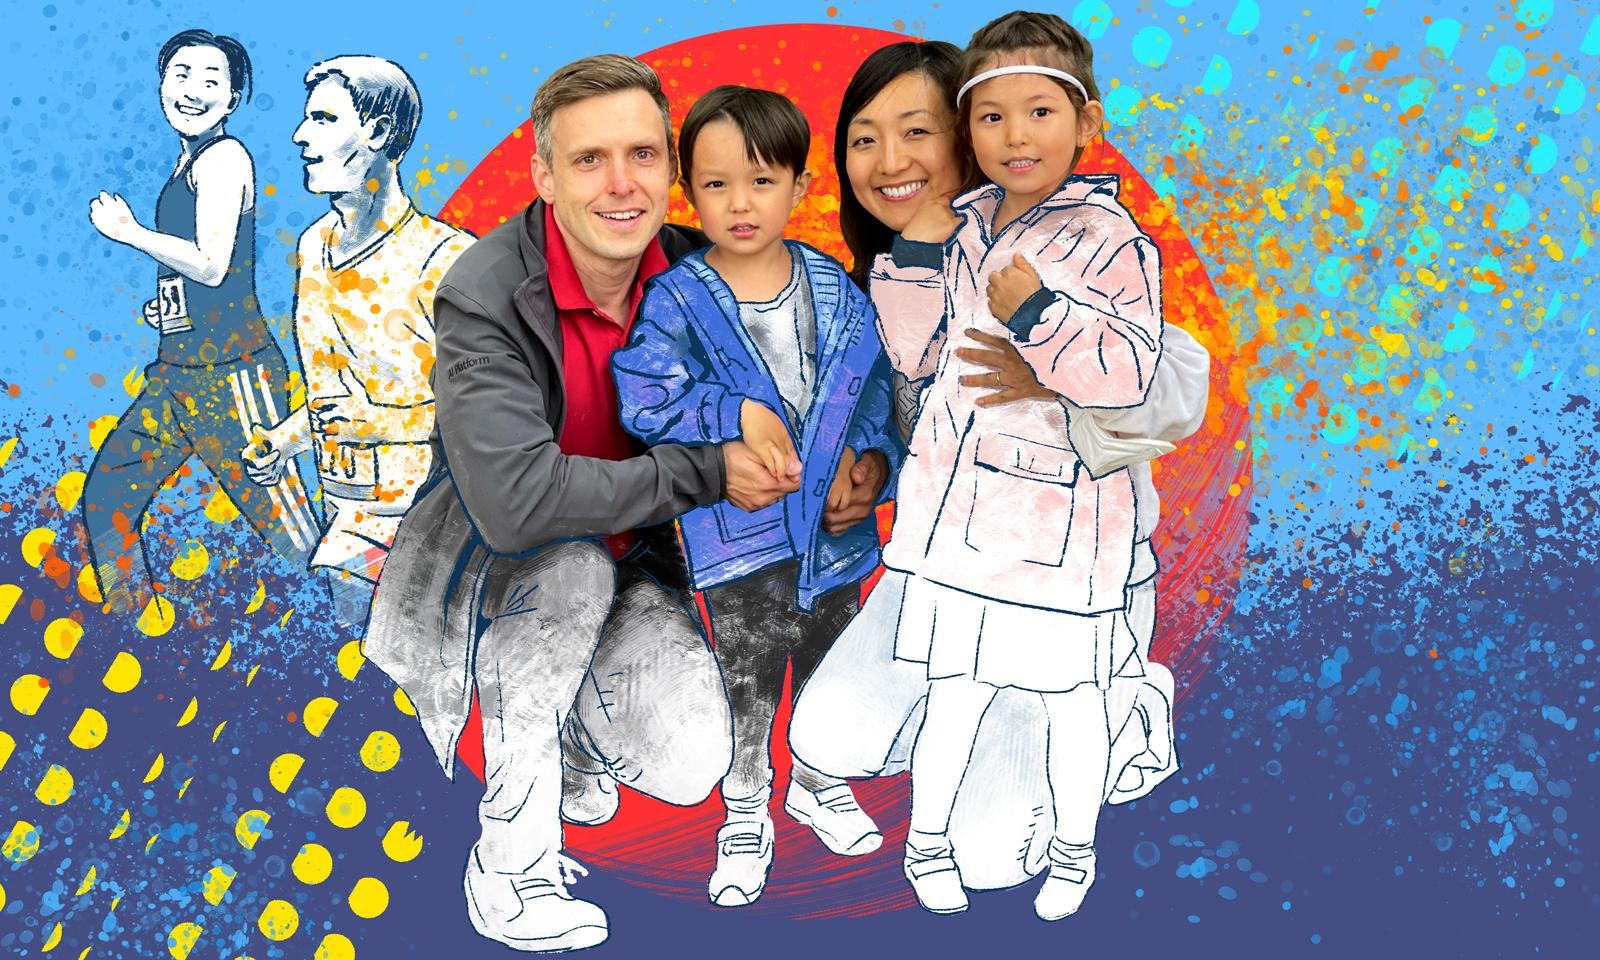 Two parents kneels and pose with their two children. Everyone smiles and illustrations of marathon runners are in the background.